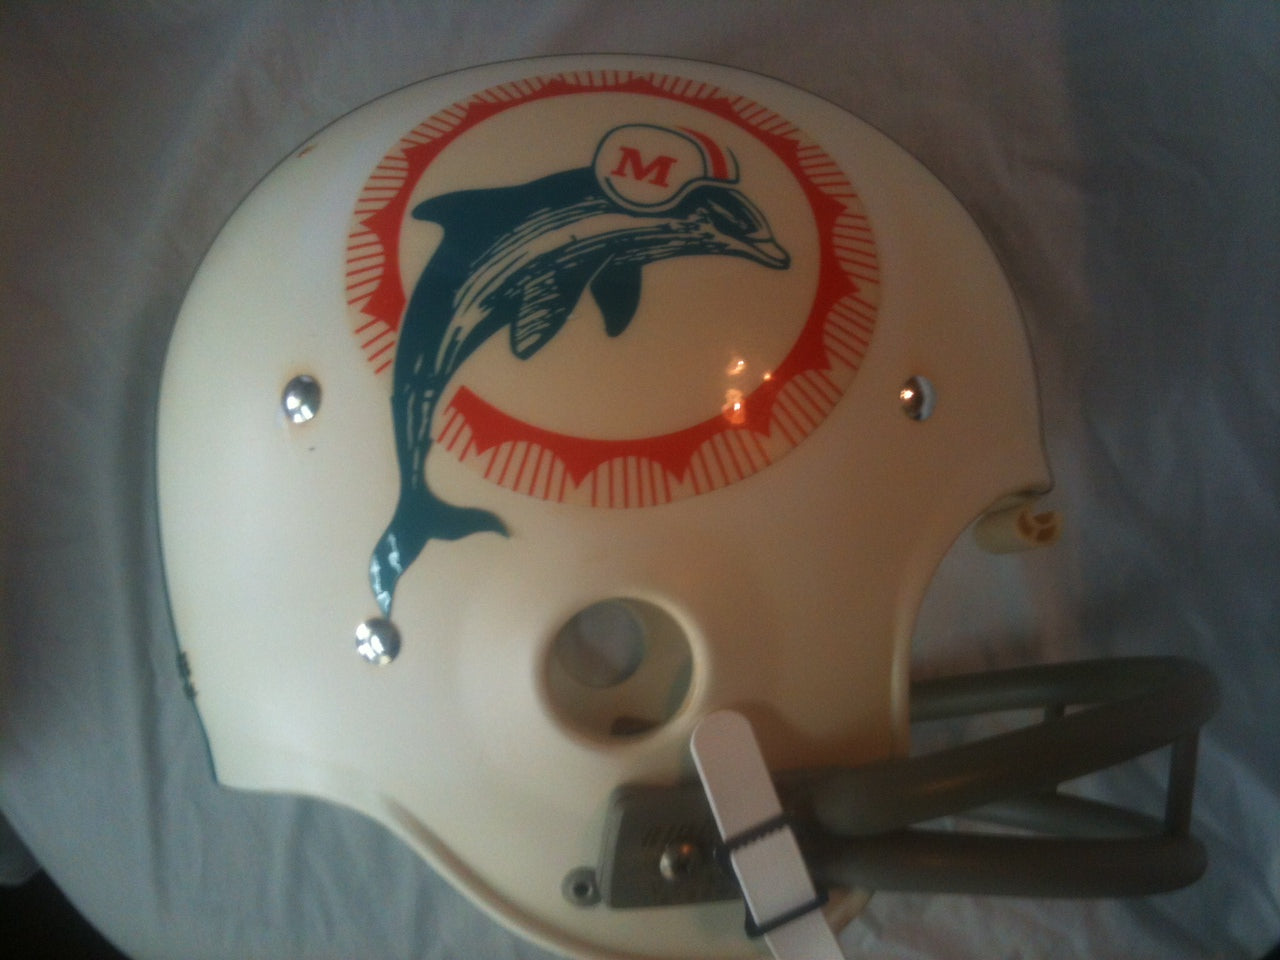 Game Used NFL, Riddell Kra-Lite, and Miscellaneous Helmets: Miami